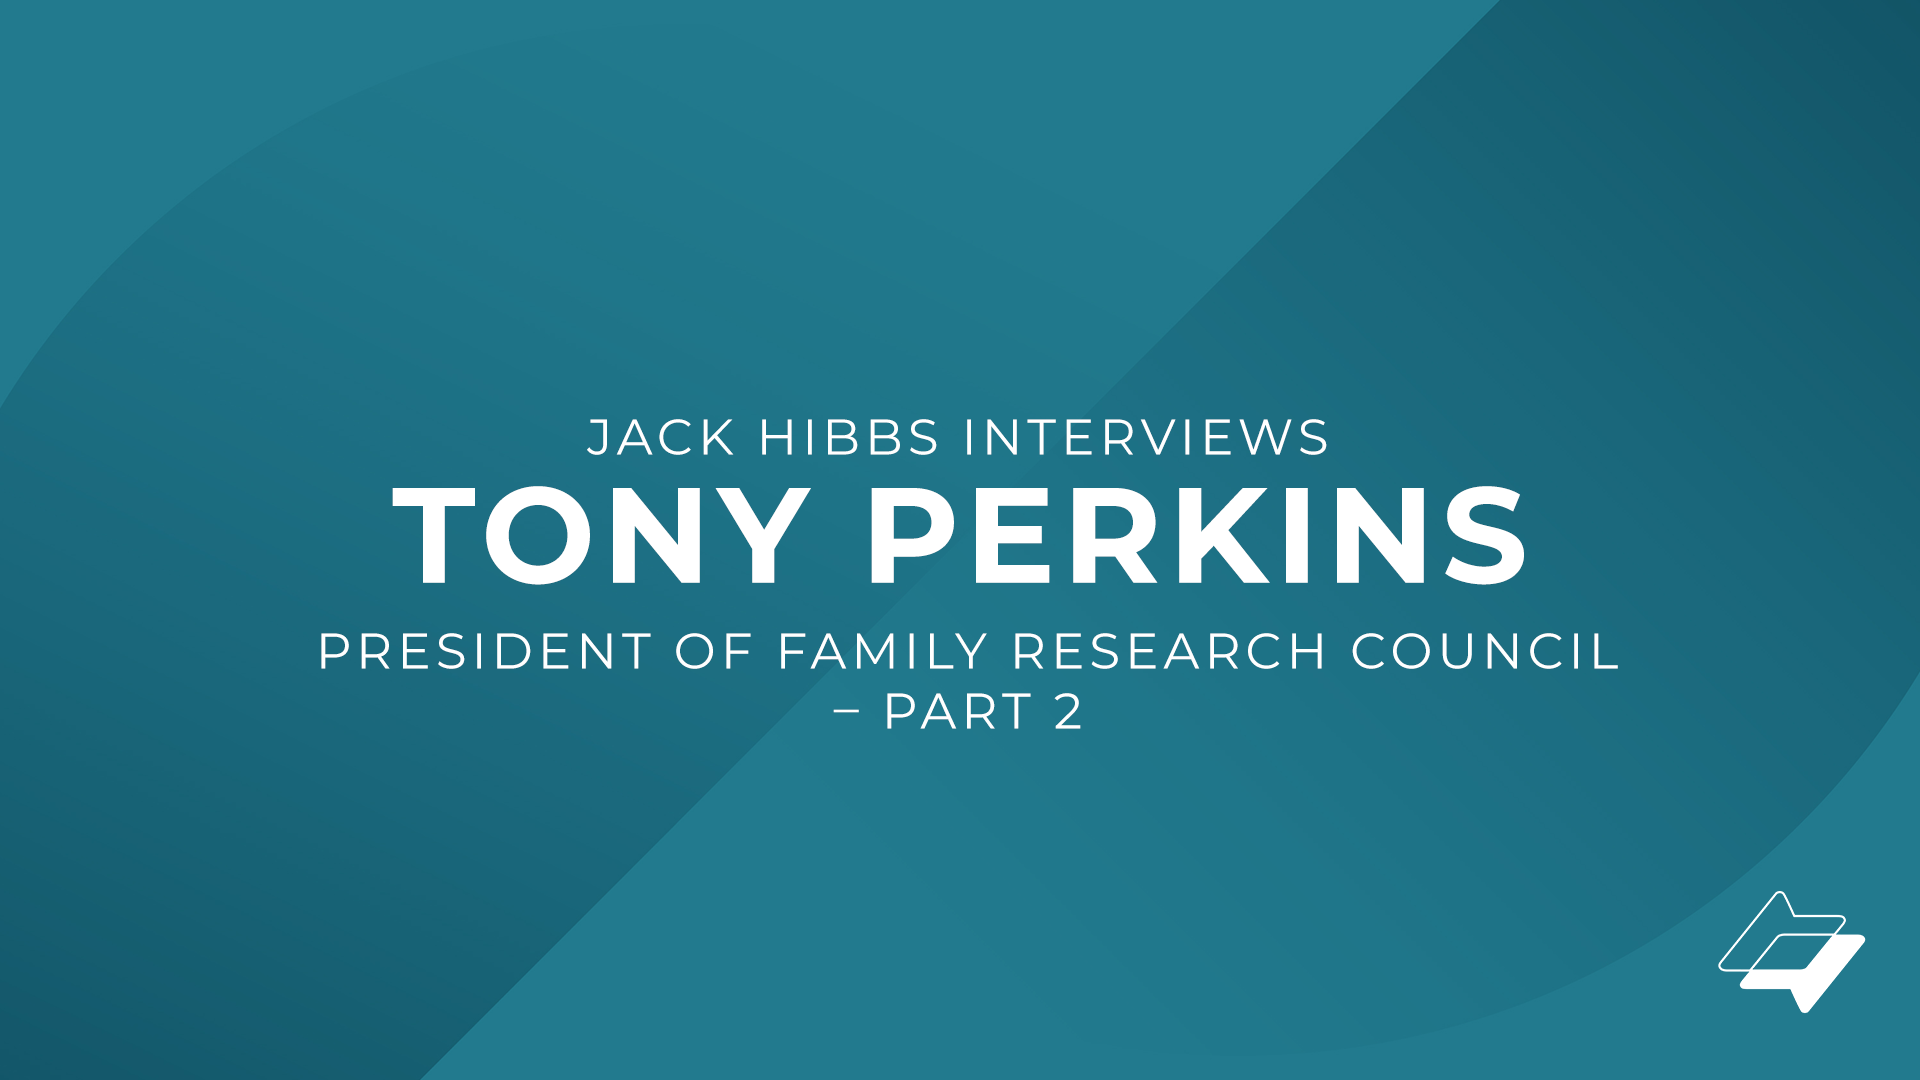 Jack Hibbs interviews Tony Perkins, President of Family Research Council – Part 2